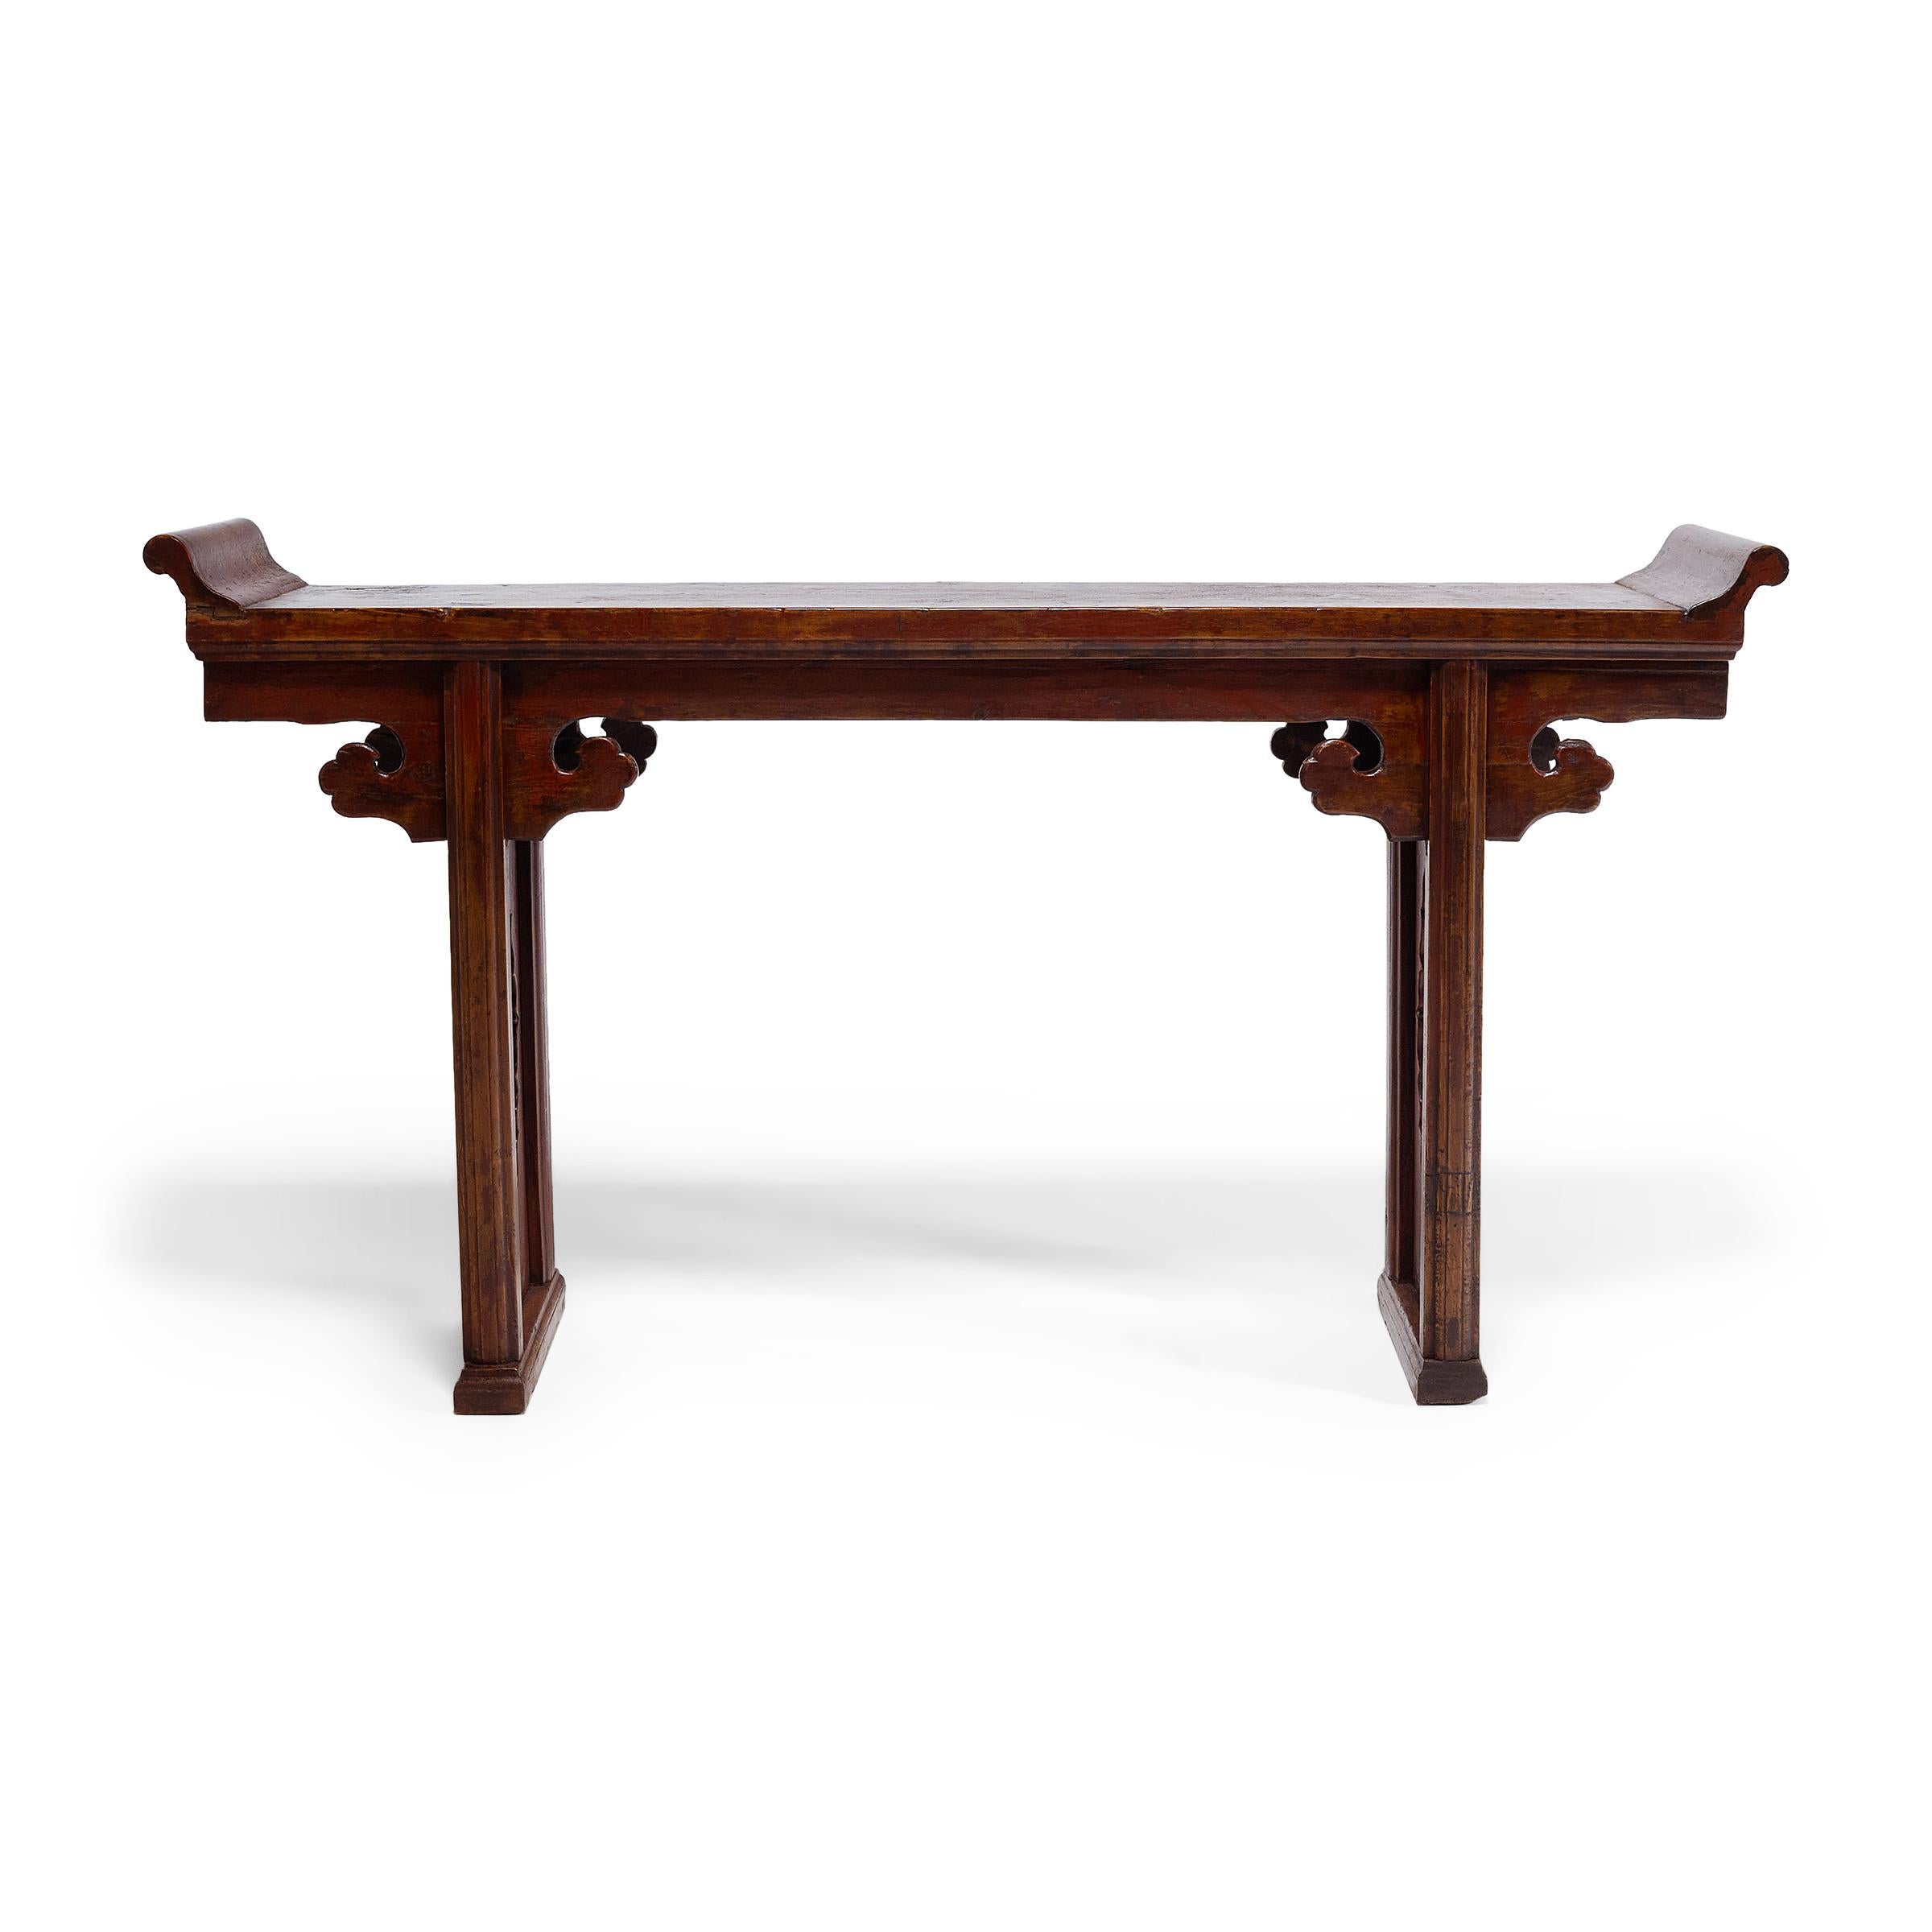 In a traditional Chinese home, a long narrow table with everted flanges is placed in the main hall and set with beautiful objects such as instruments, flowers, or porcelains. Often referred to as altar tables, these slender tables are also used as a